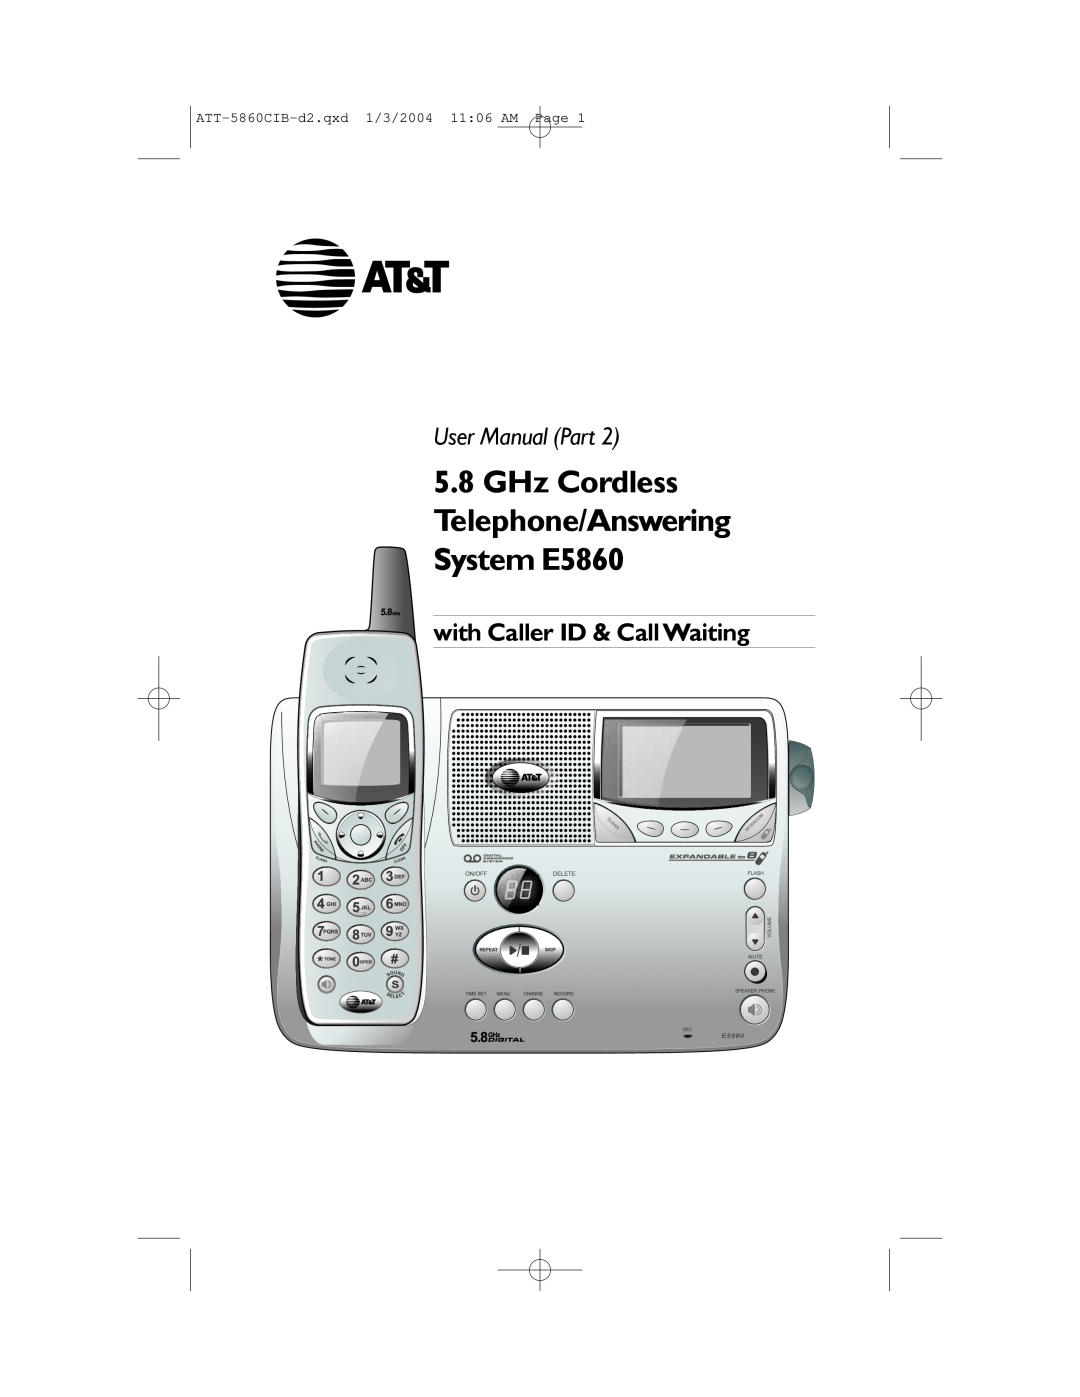 AT&T user manual User Manual Part, with Caller ID & CallWaiting, GHz Cordless Telephone/Answering System E5860 